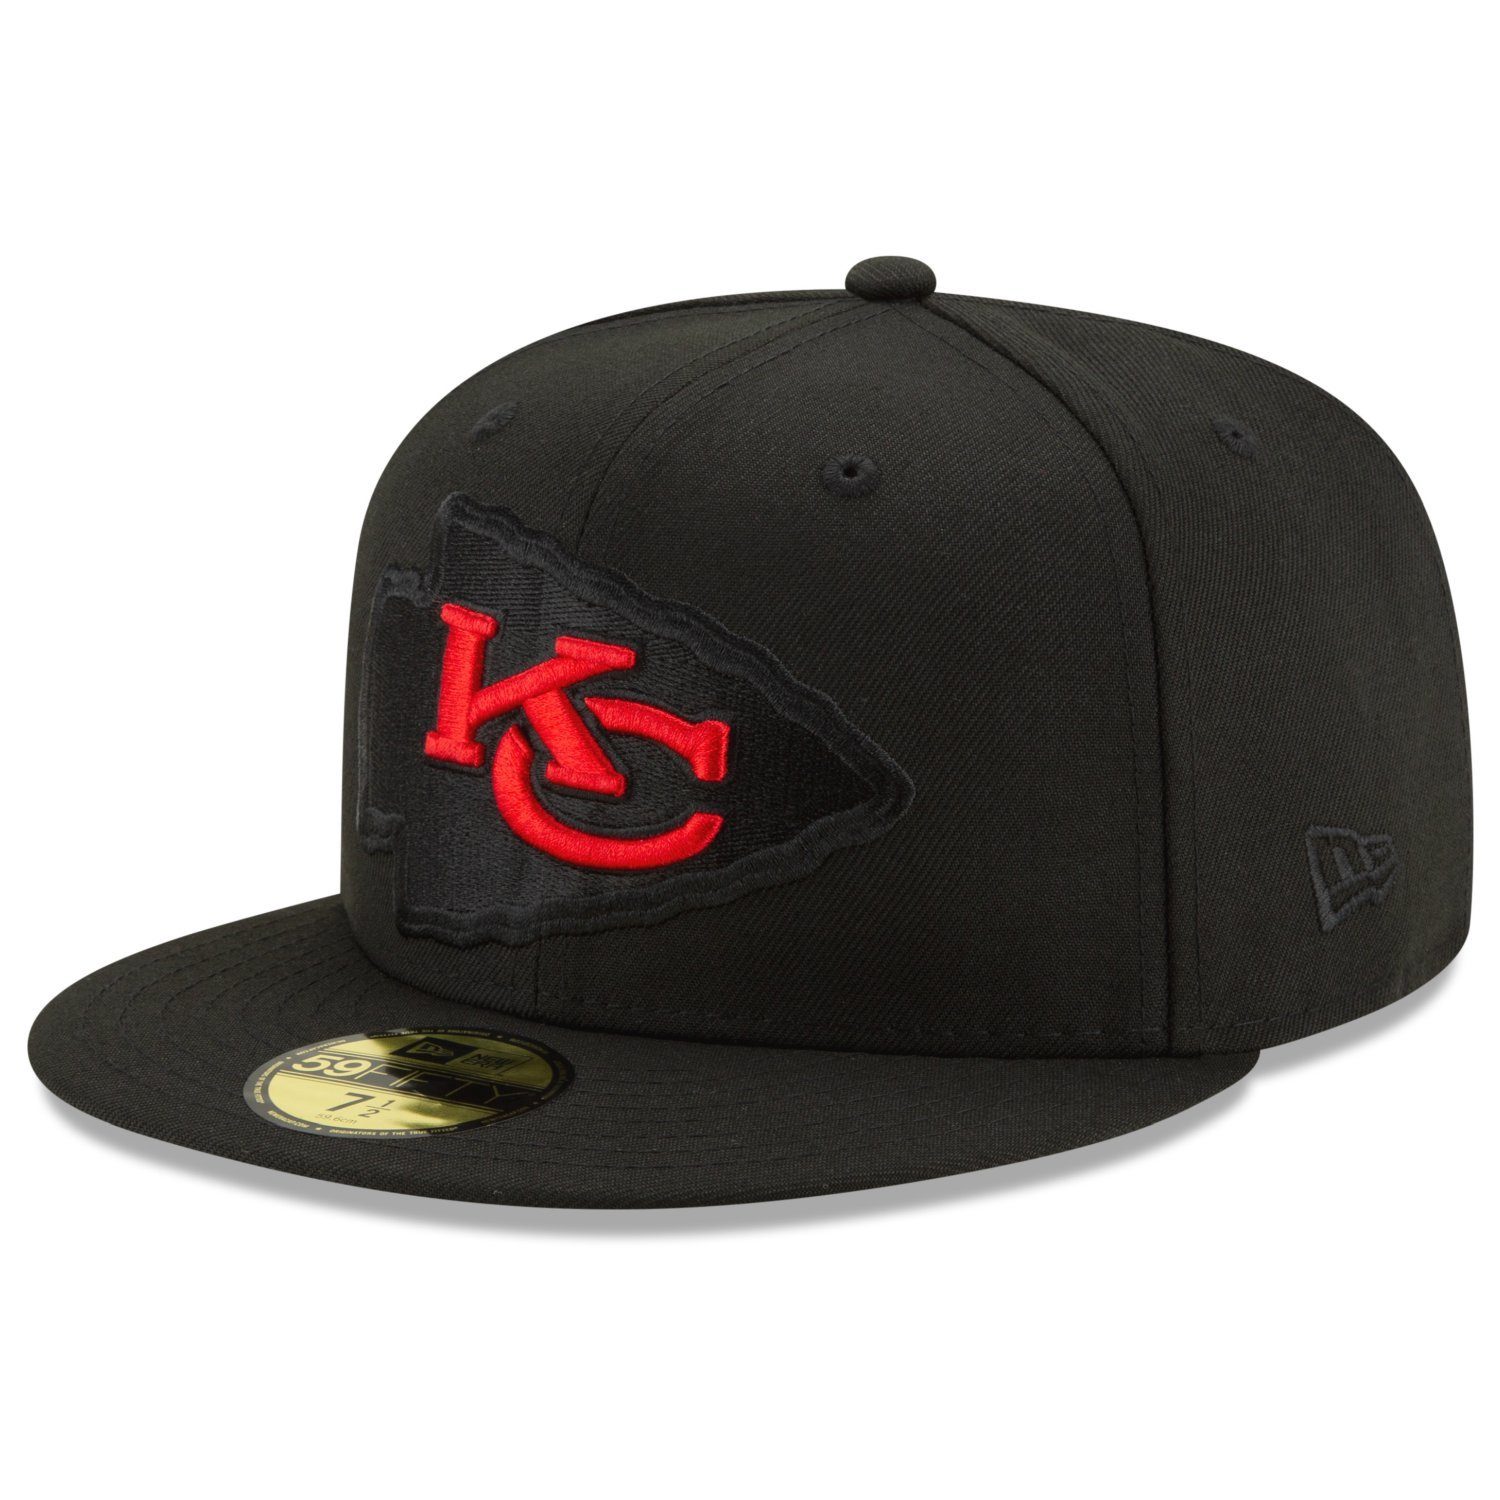 New Era Fitted Cap 59Fifty NFL ELEMENTS 2.0 Kansas City Chiefs